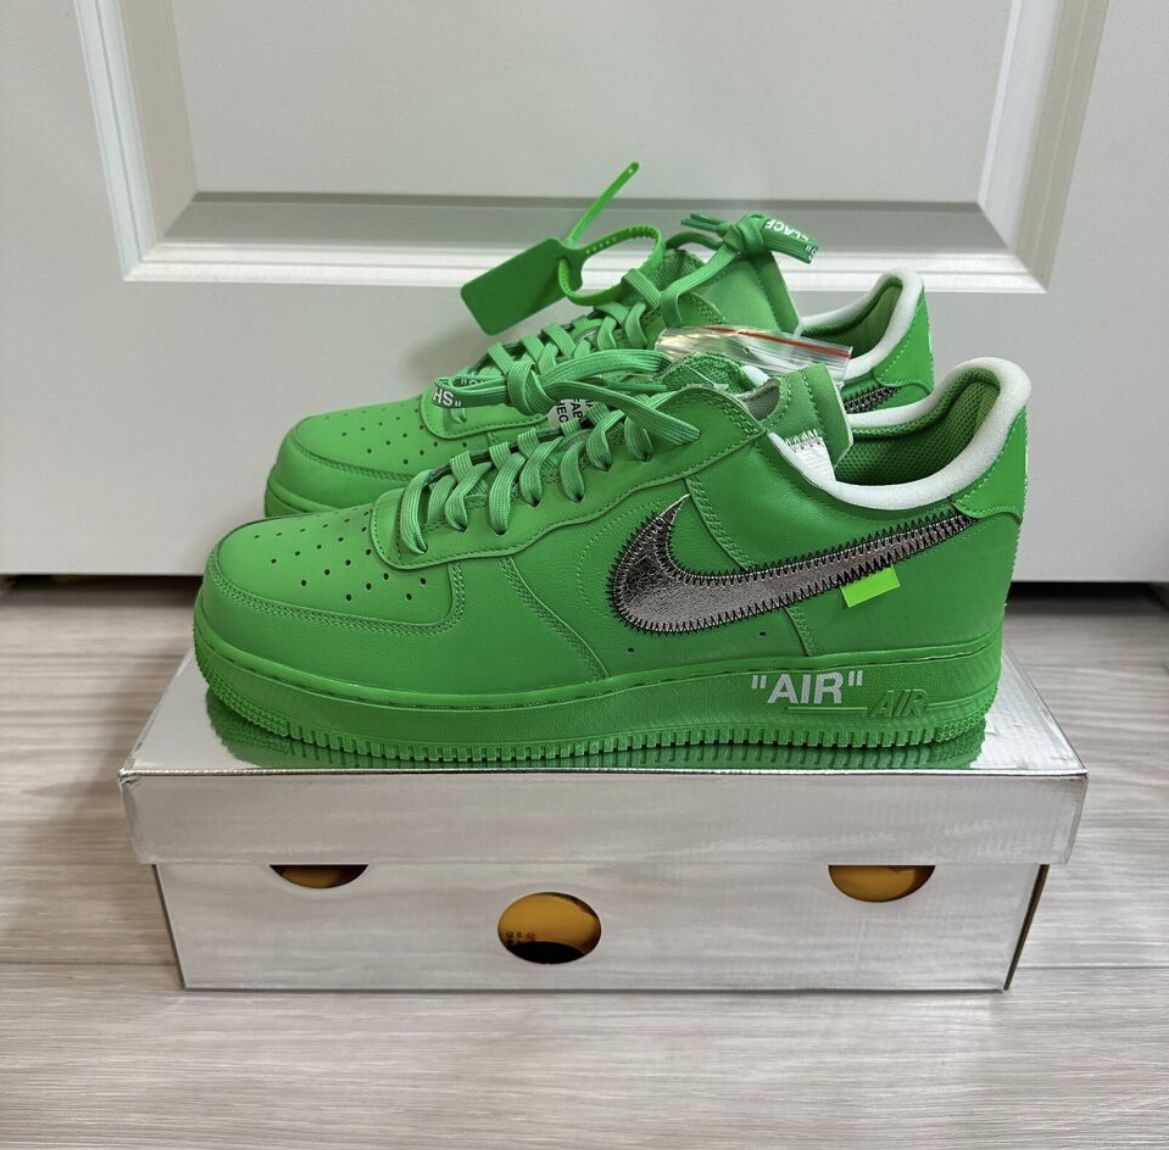 Off-White Air Force 1 Brooklyn for Sale in Altamonte Springs, FL